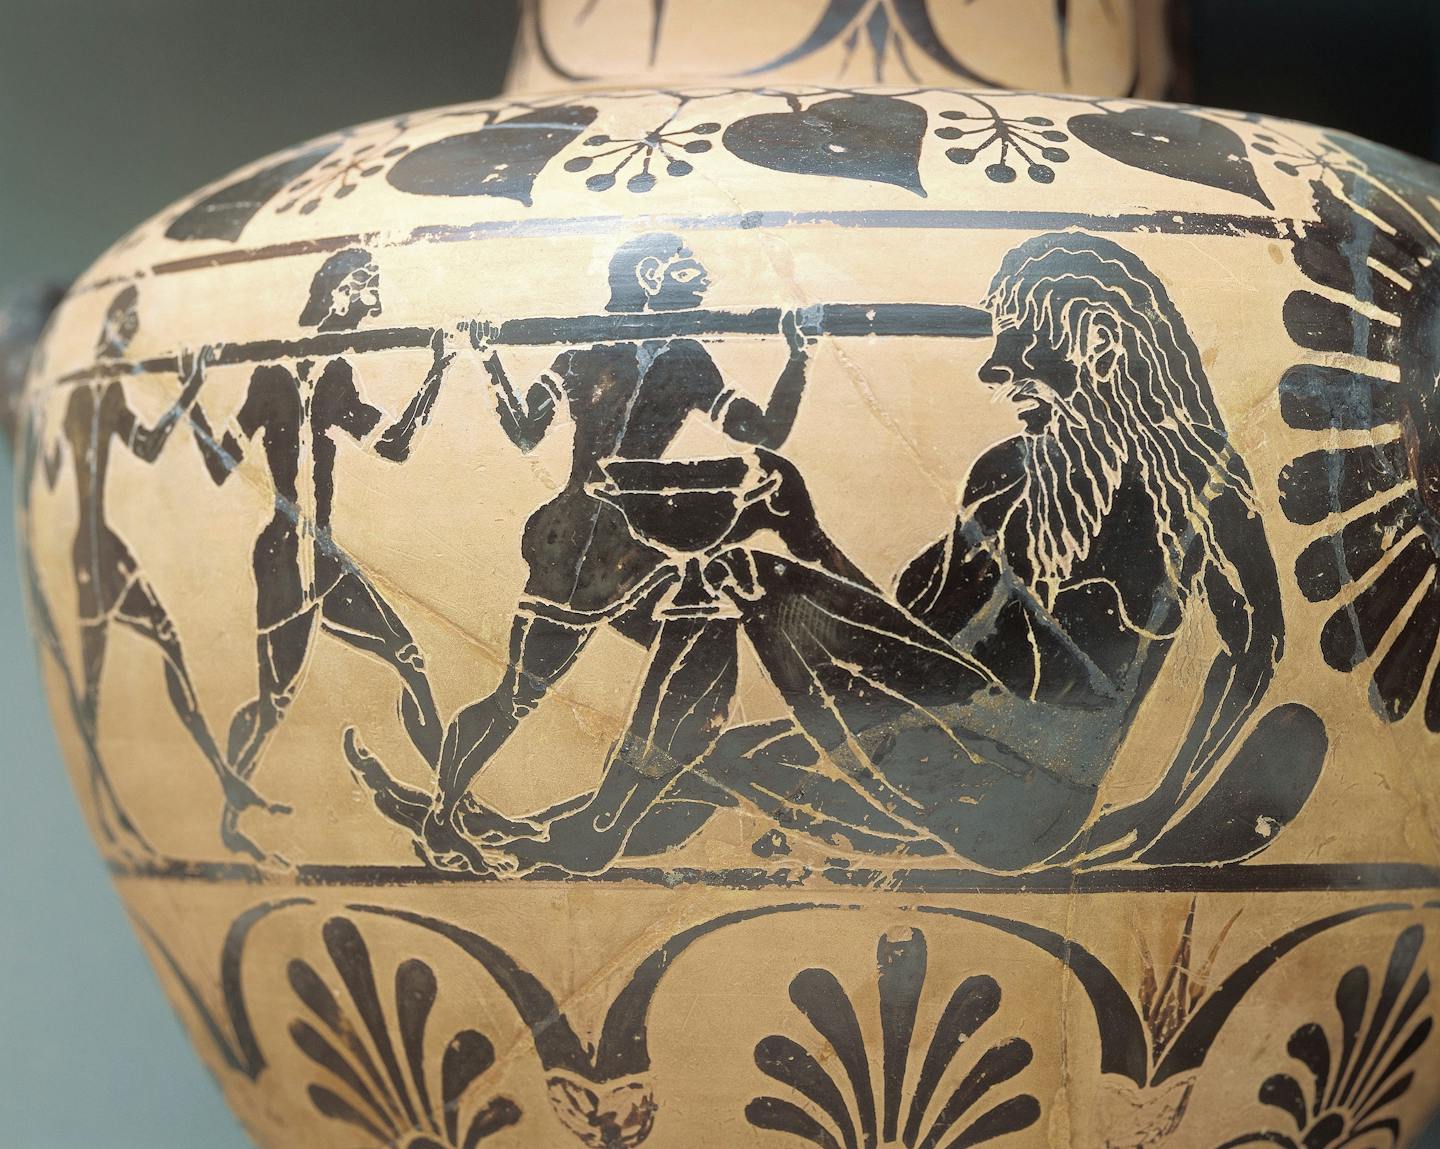 Etruscan pottery with black motifs that blind the giant with a spear